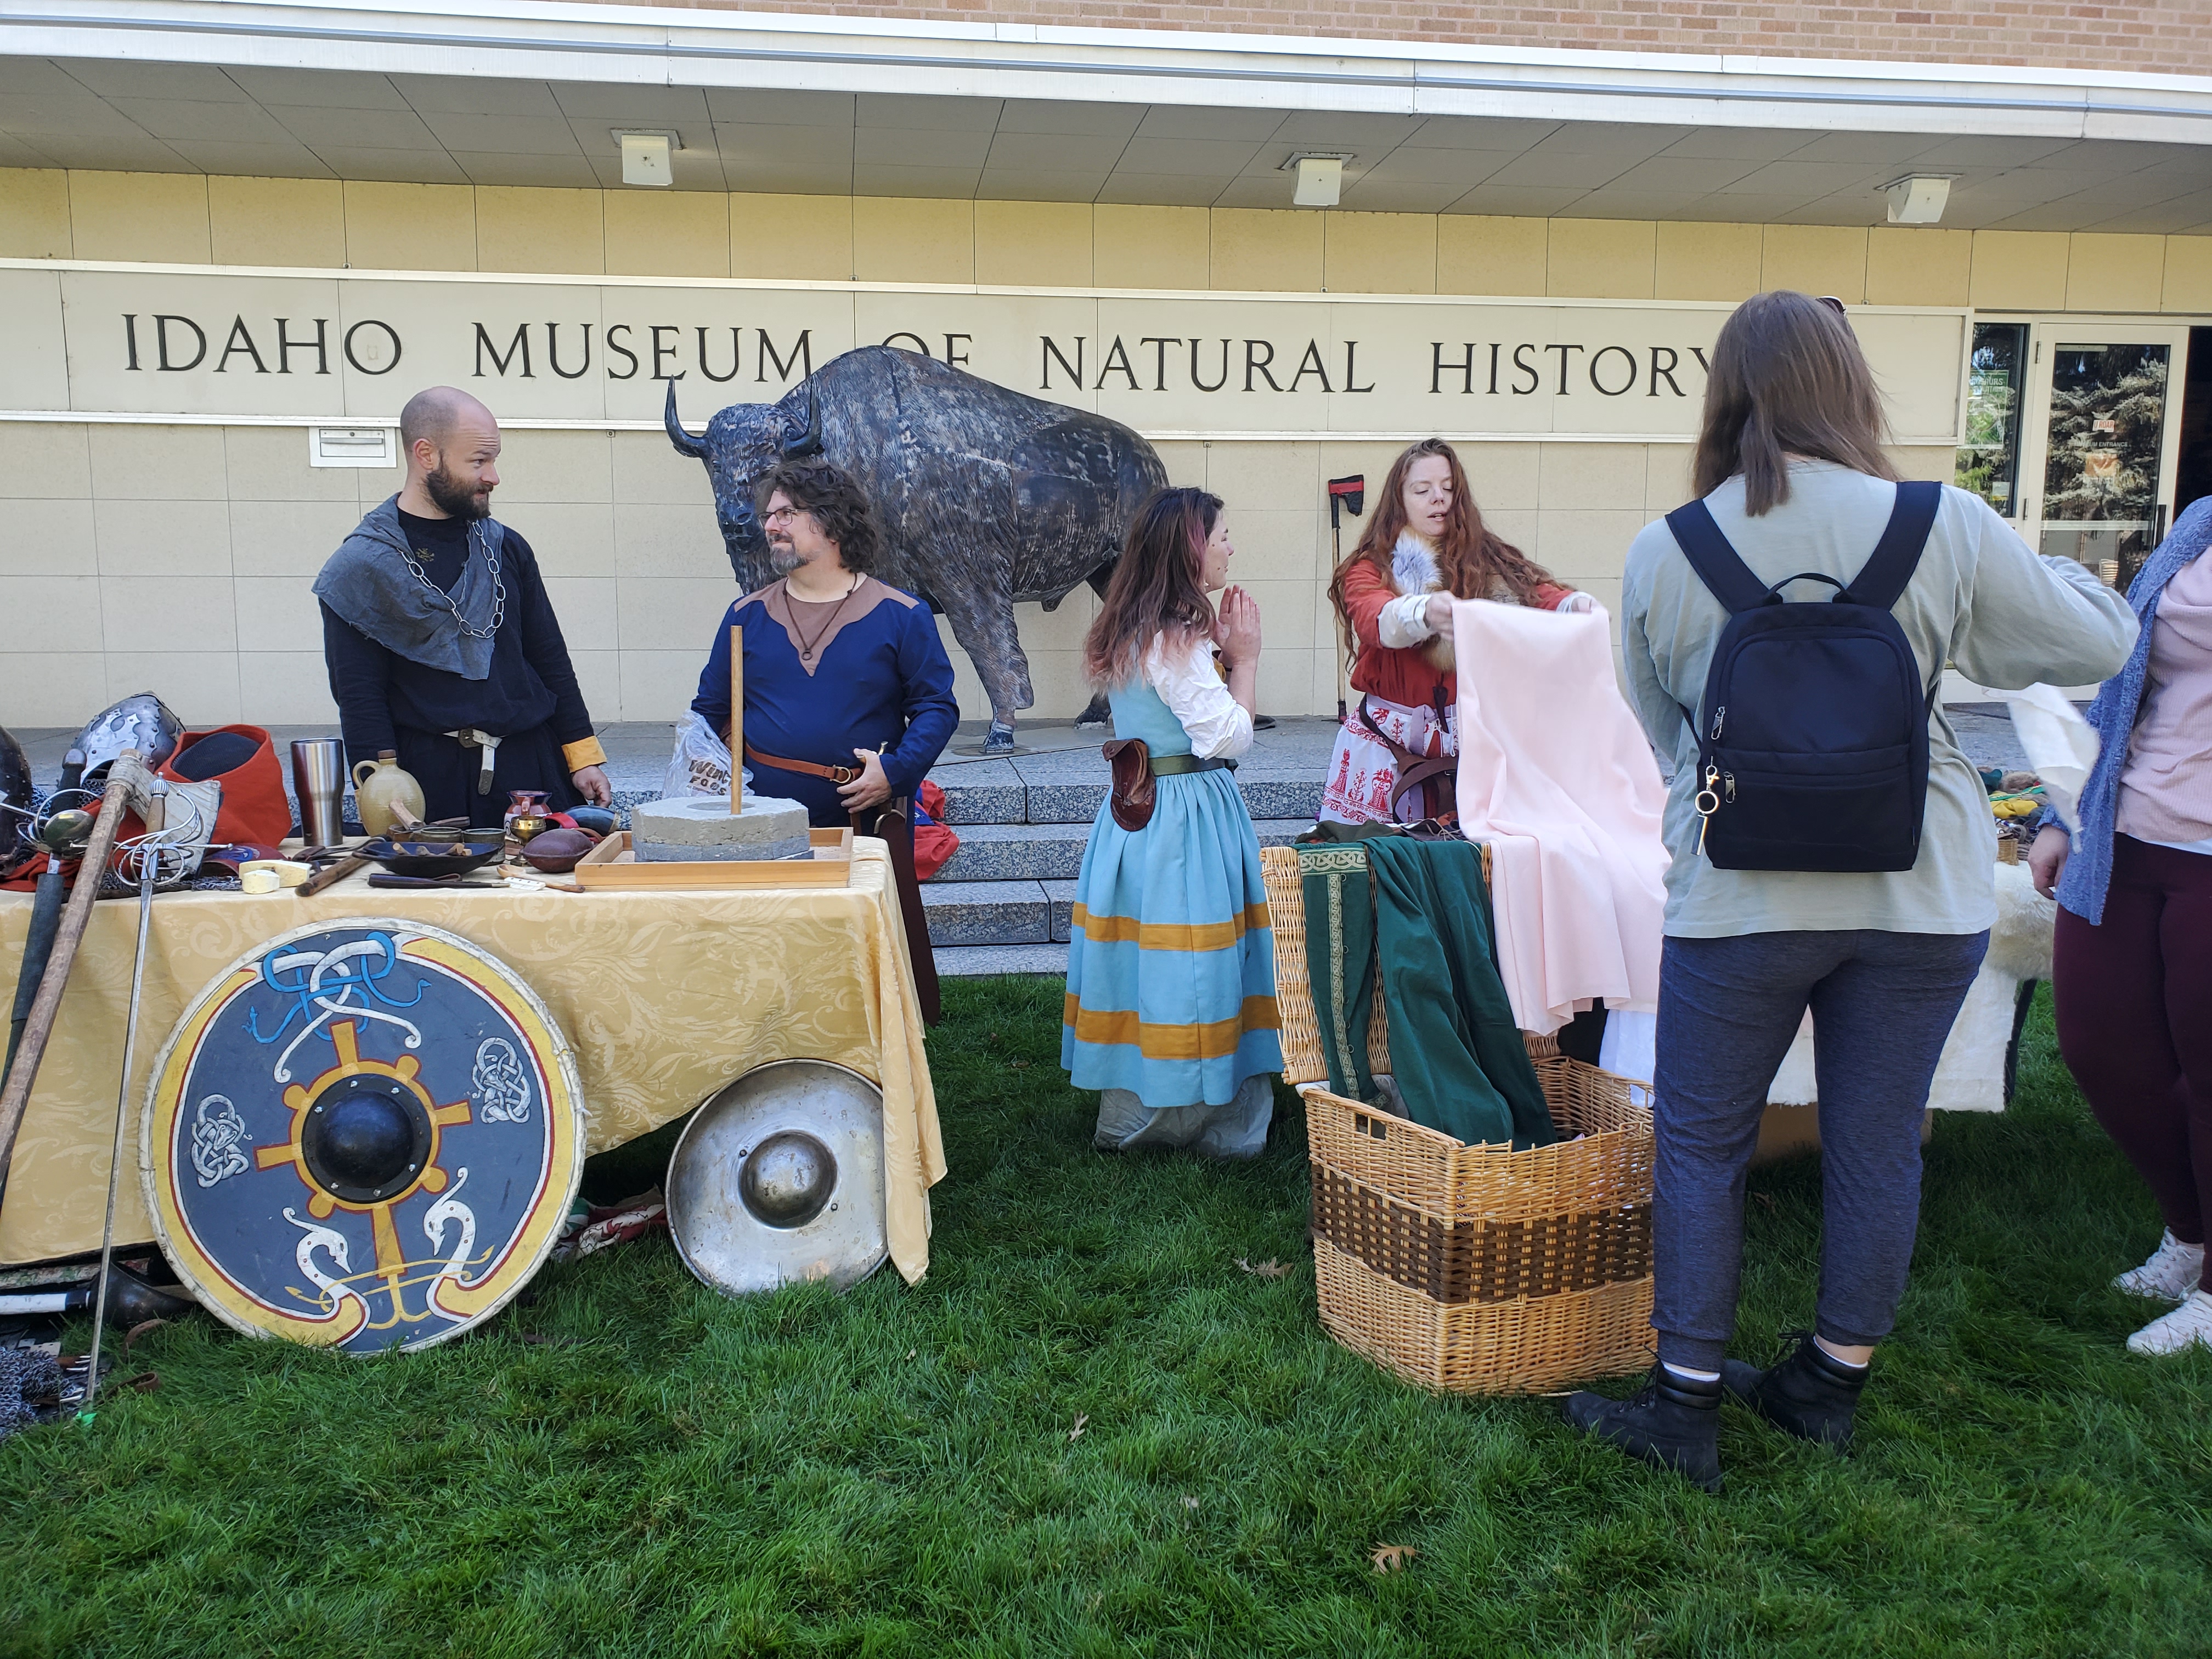 Men and women dressed in medieval garb for a mabon celebration in front of the idaho museum of natural history